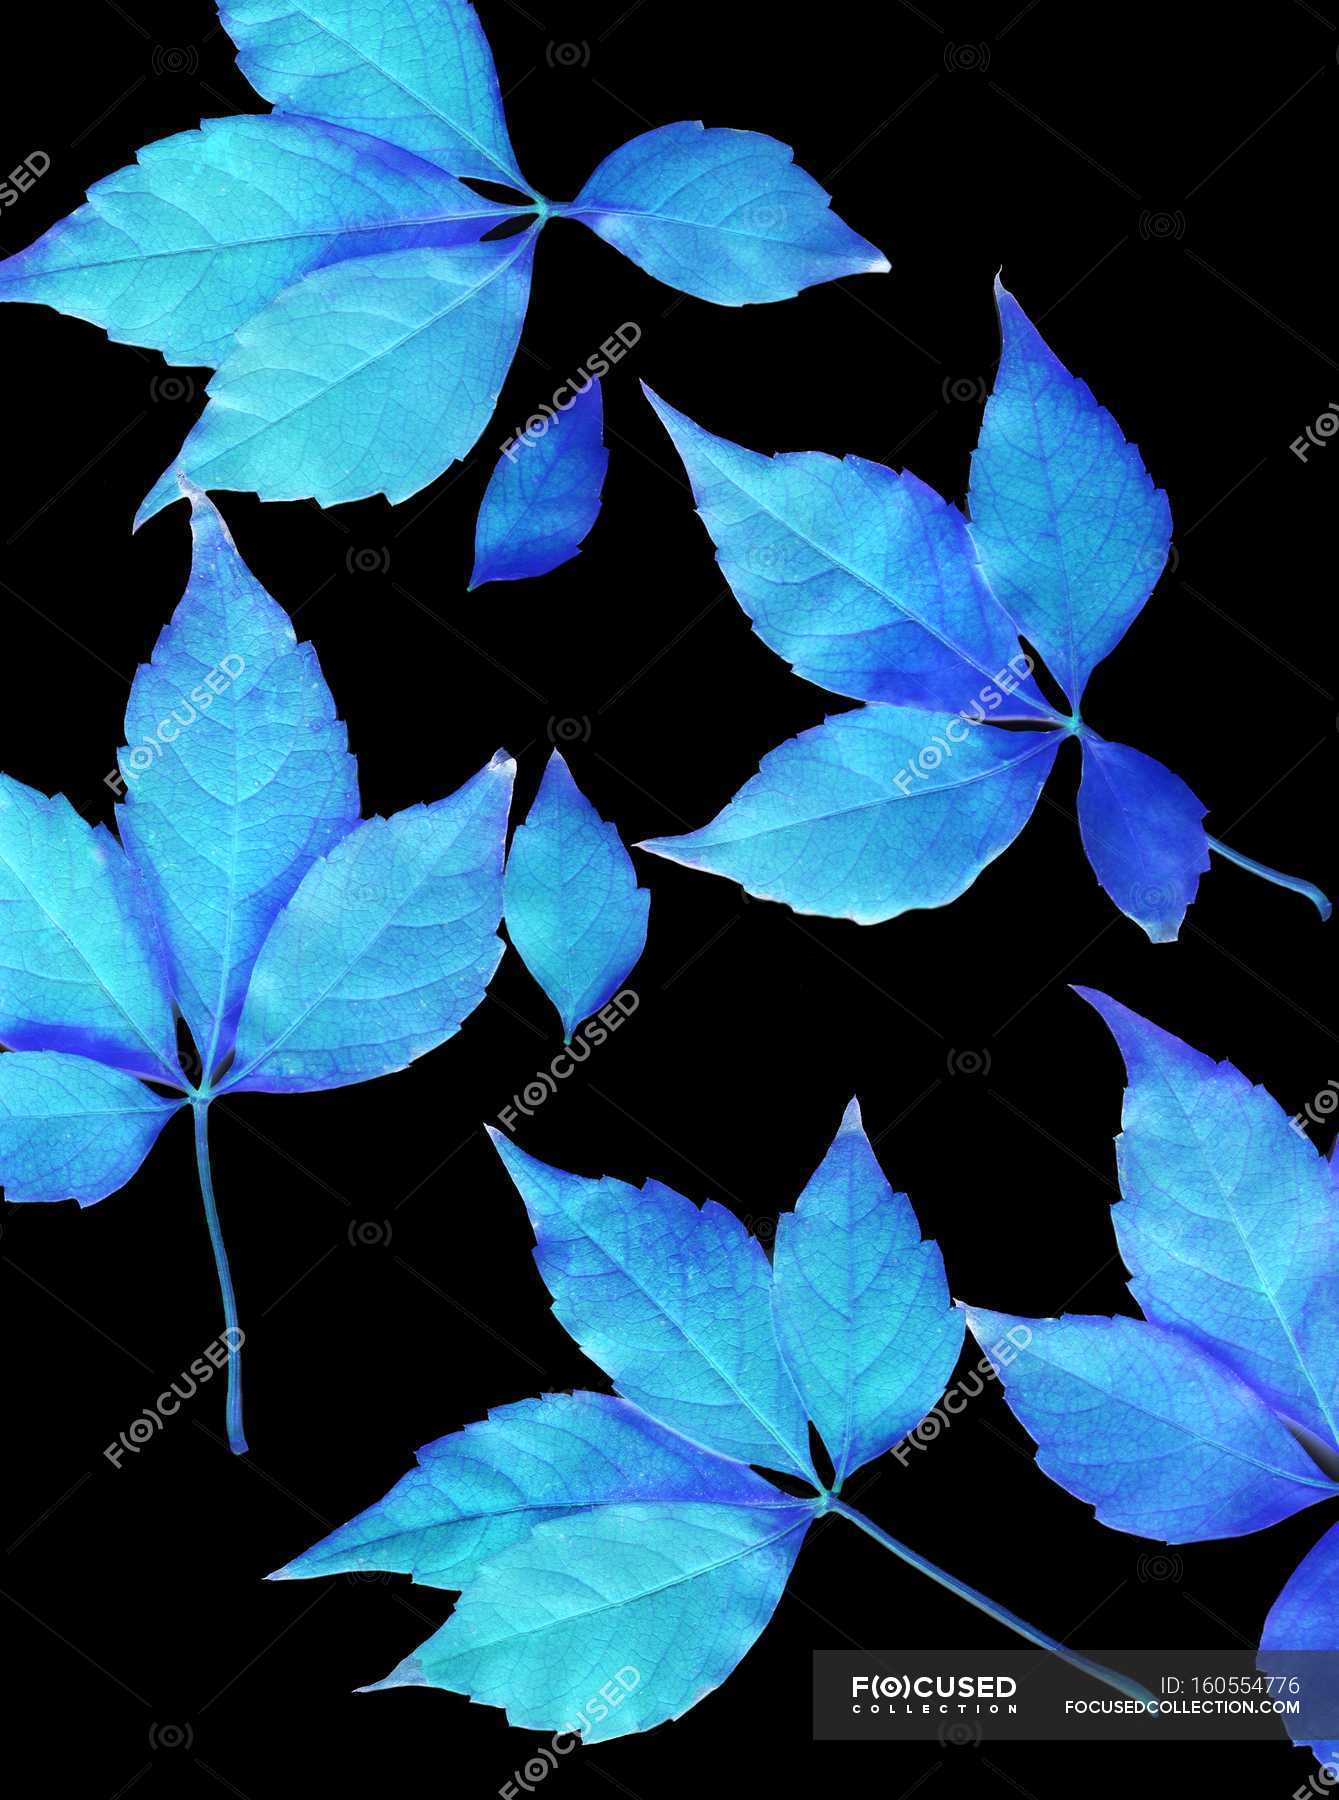 Blue leaves on black background. — tree leaves, floral - Stock Photo |  #160554776